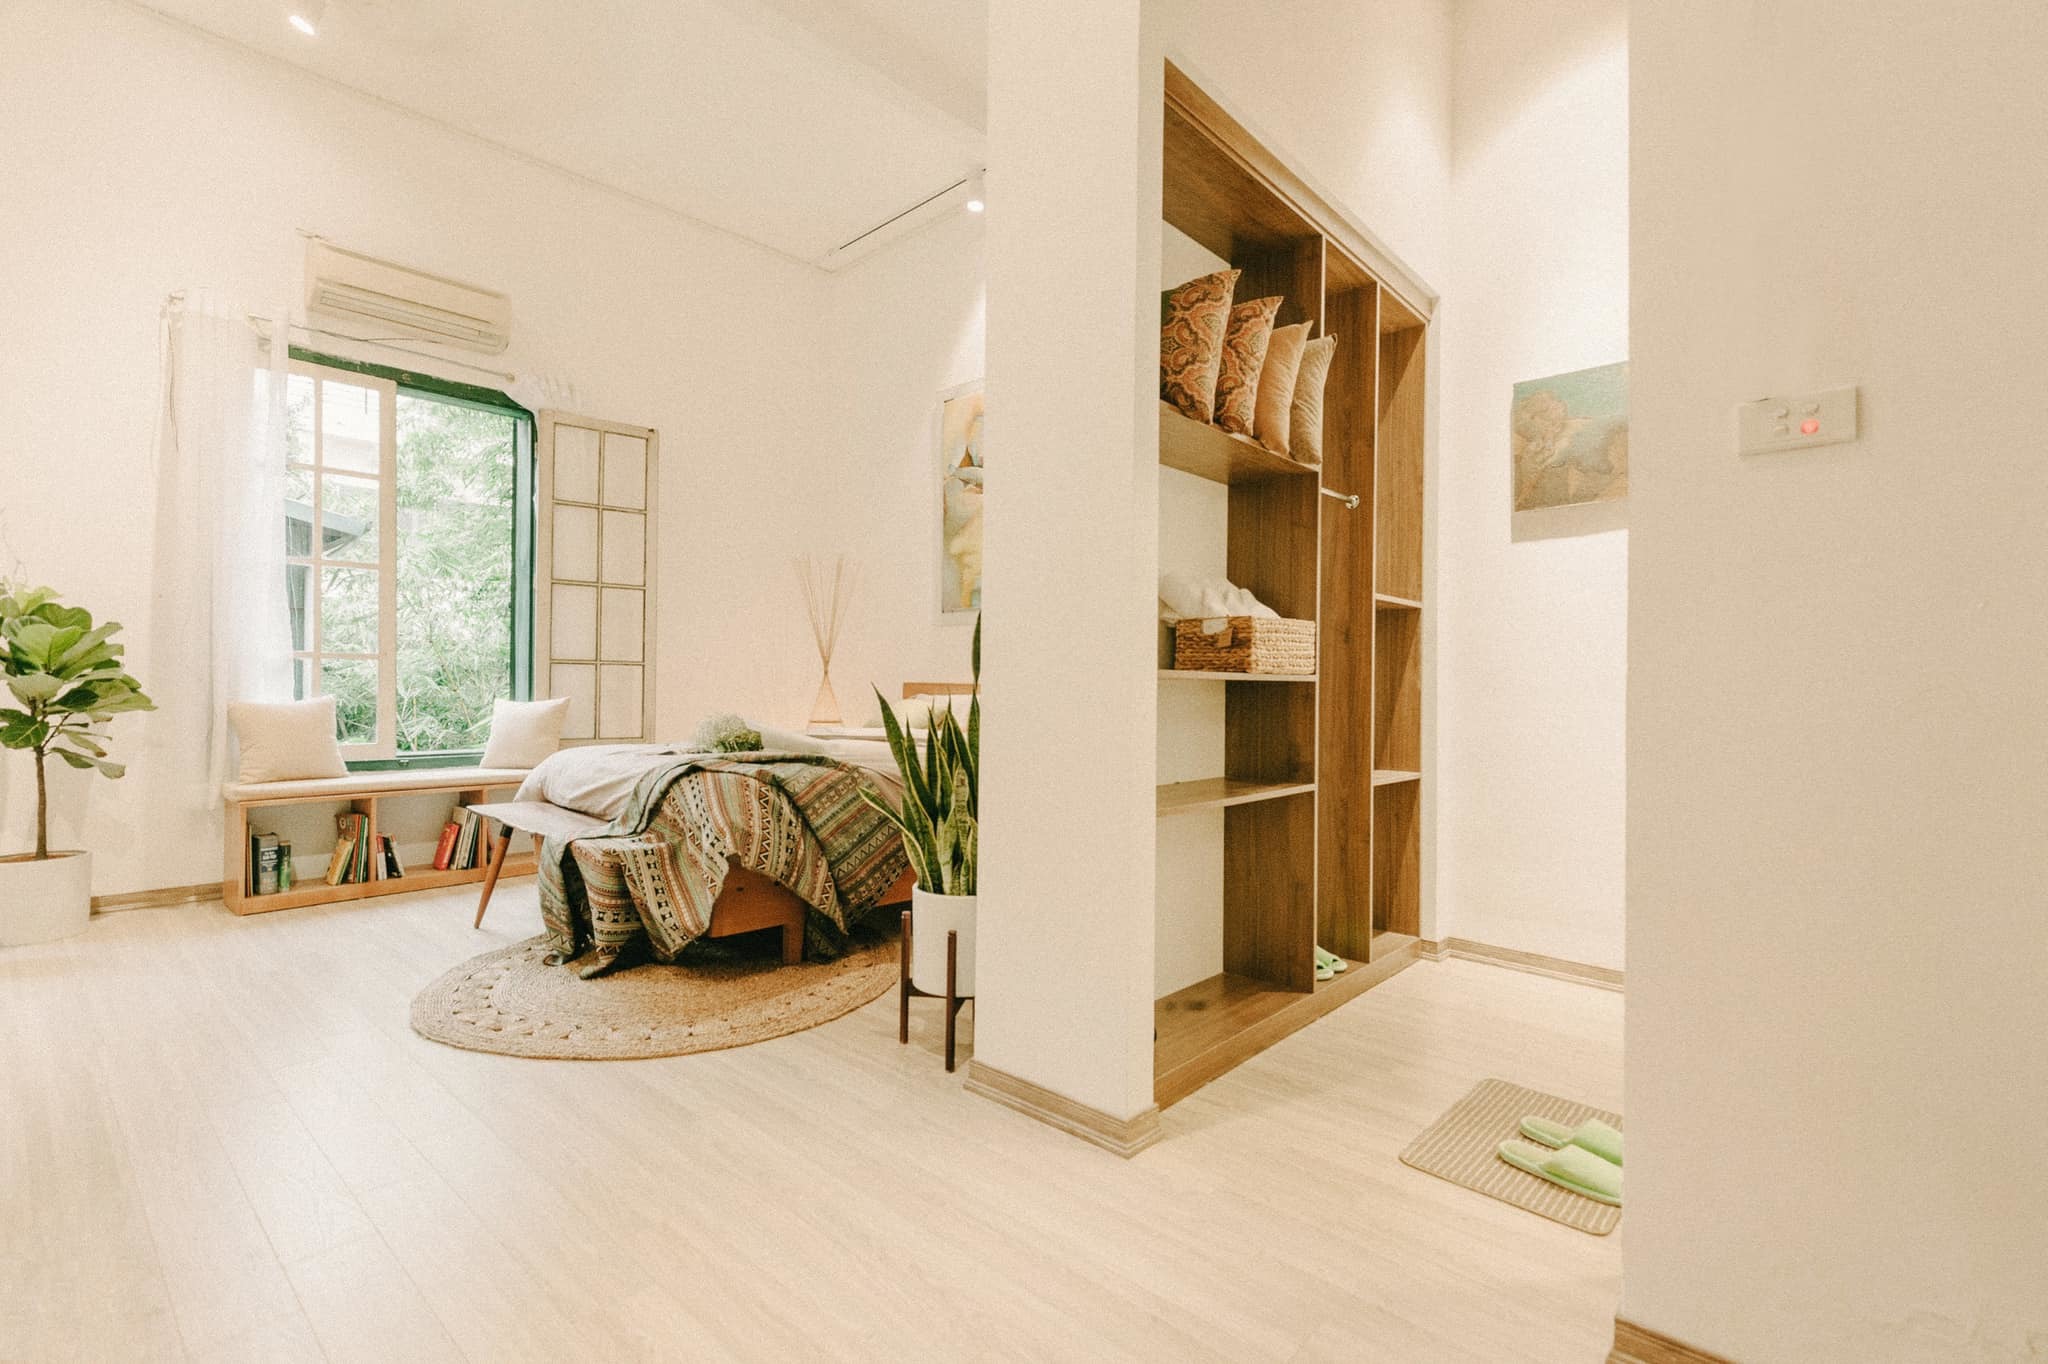 Renovating a studio apartment located in an old French villa in the Rustic style